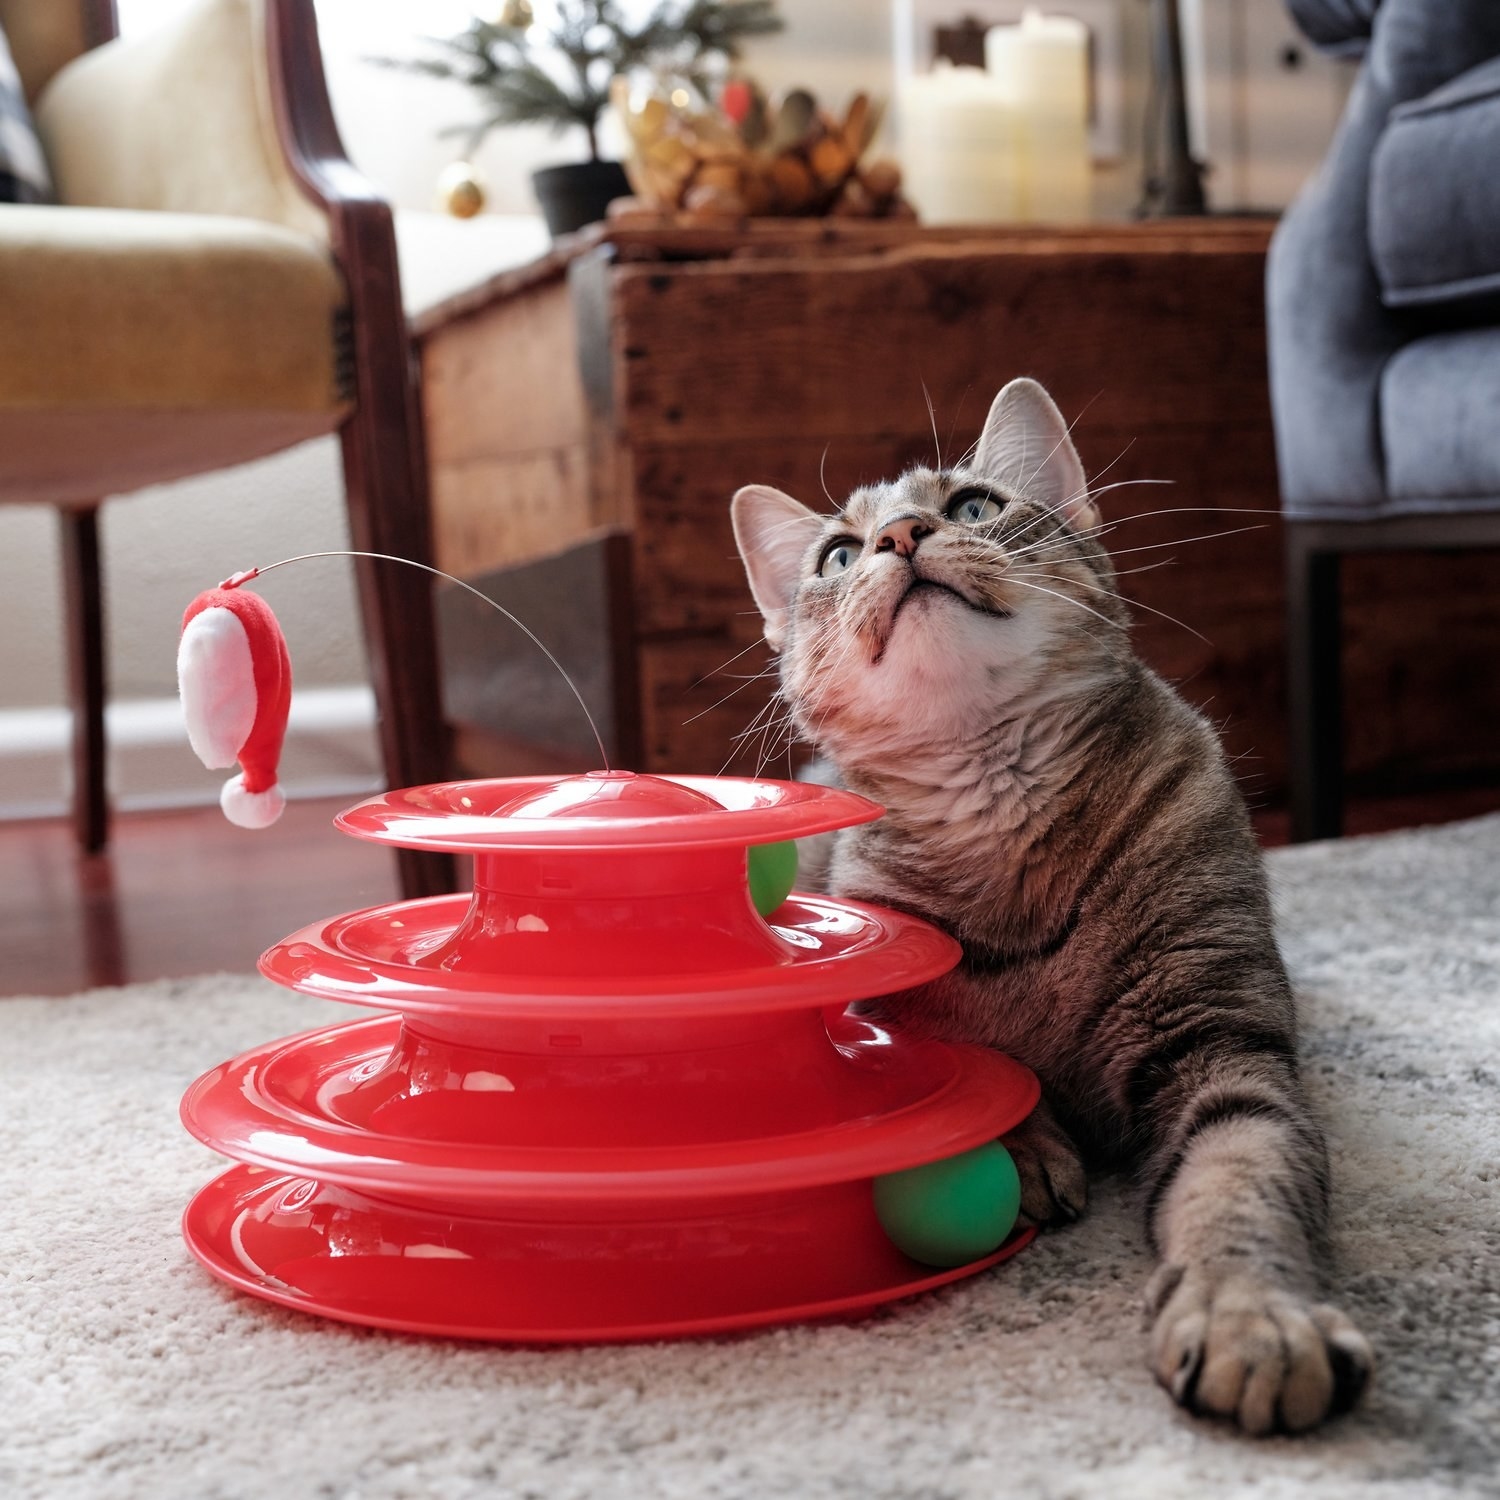 A cat next to a red, three-tiered track toy with green balls and a Santa hat topper.